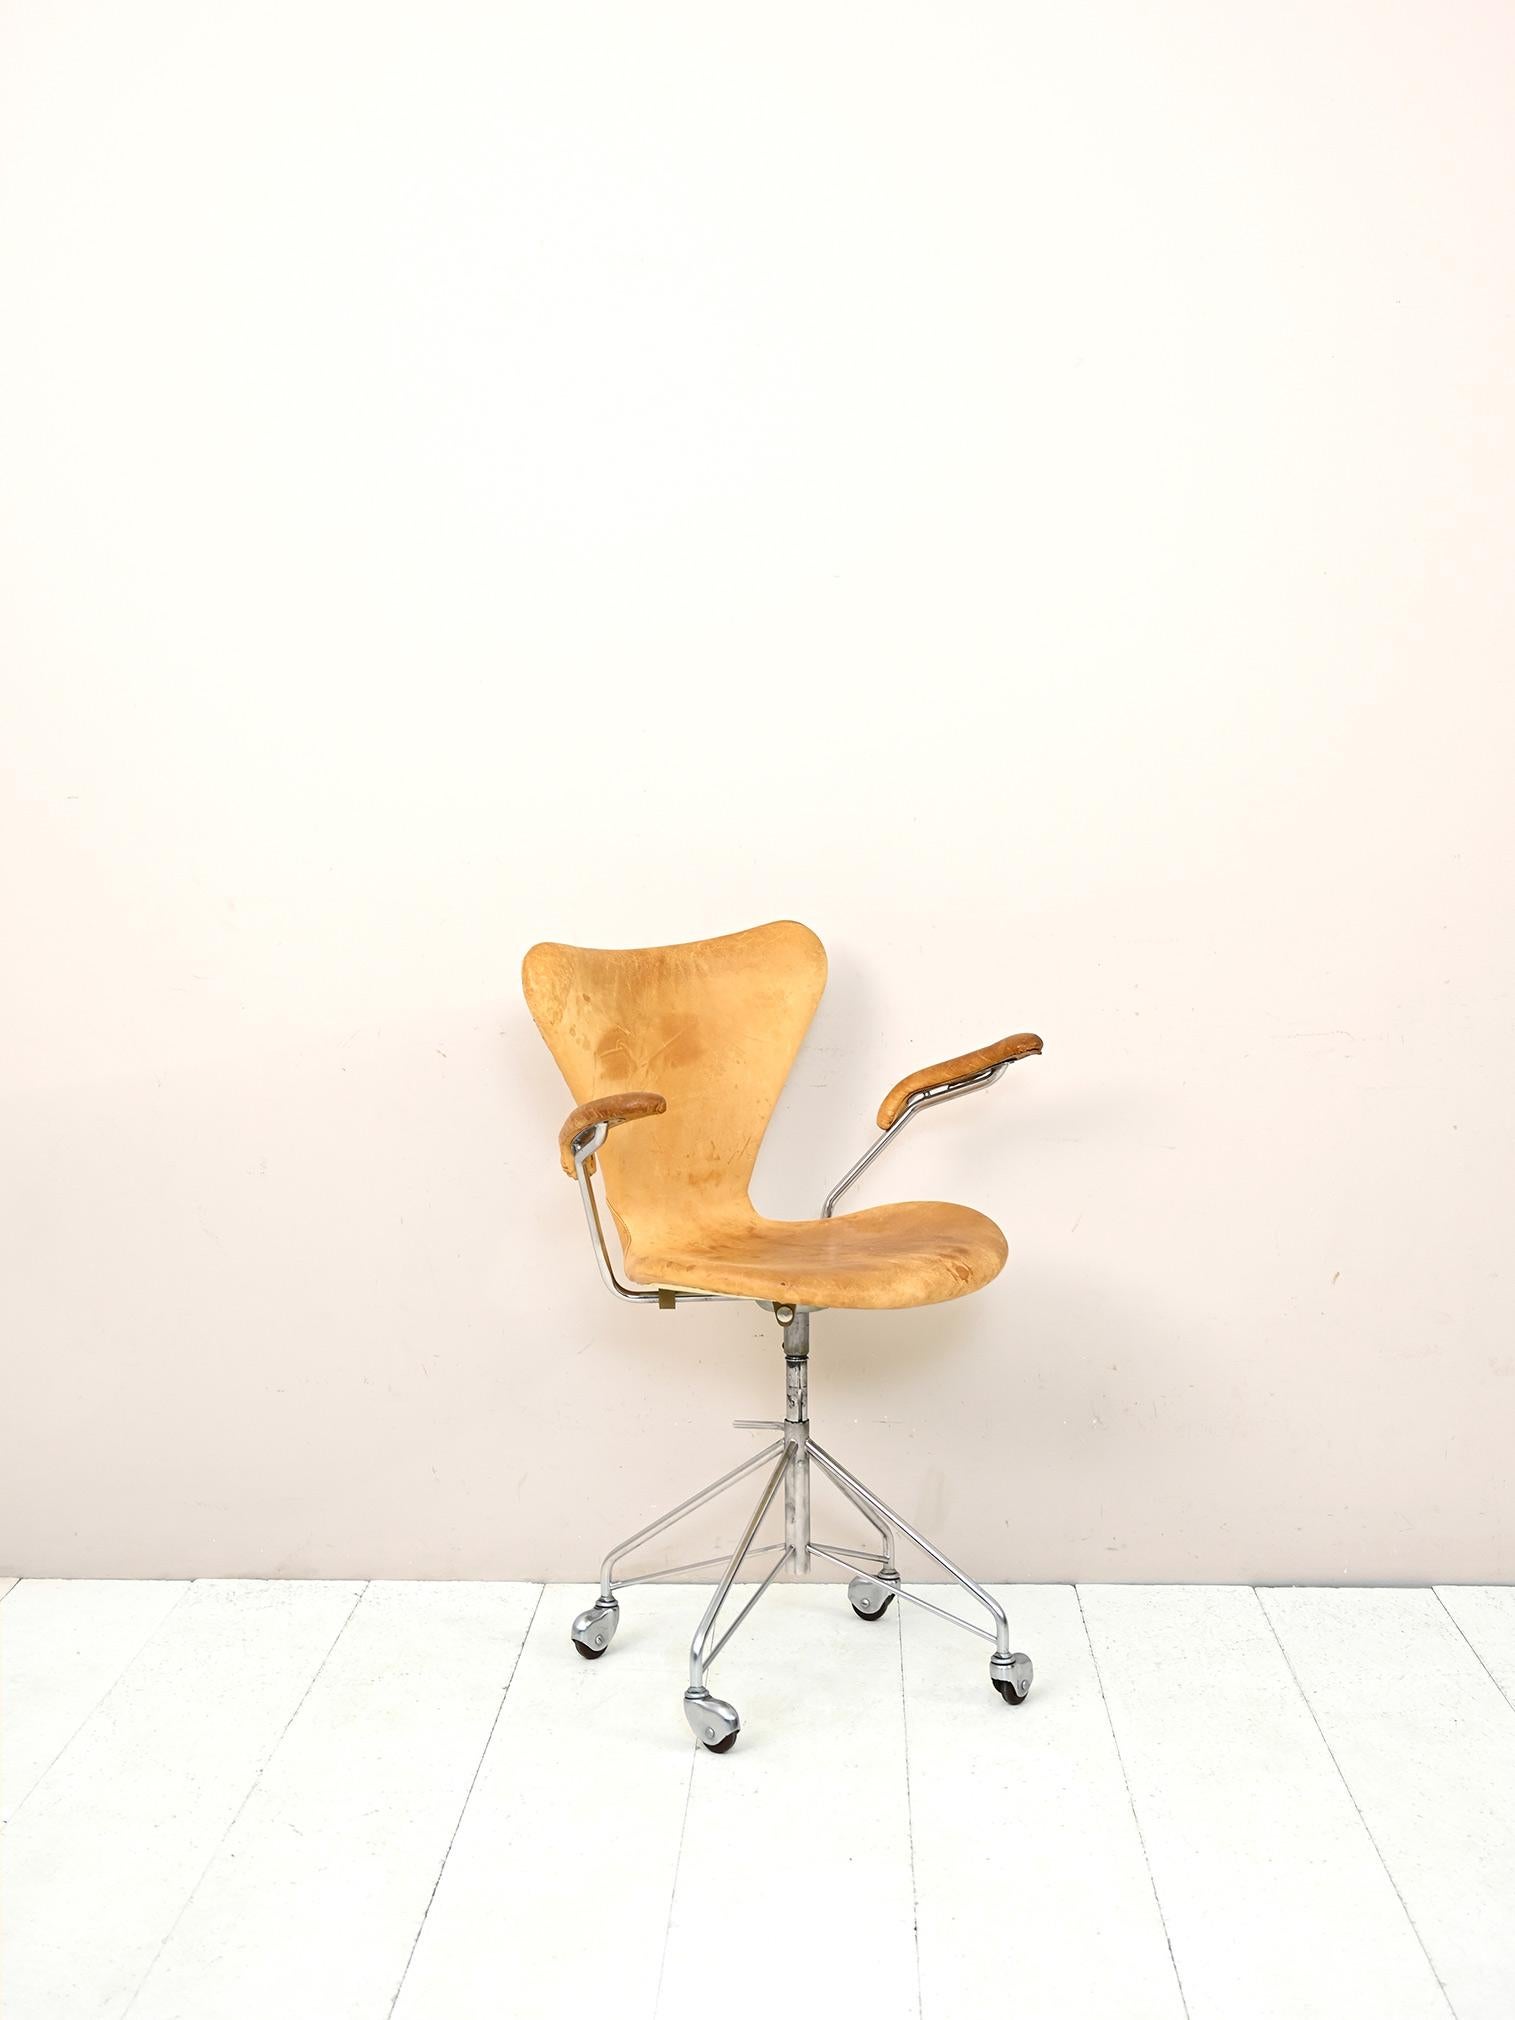 Model 3217 office swivel chair in patinated leather designed by Arne Jacobsen for Fritz Hansen. Made in Denmark. The chair is original vintage from the 1950s. Very good condition.

Good condition. A conservative restoration was done with natural